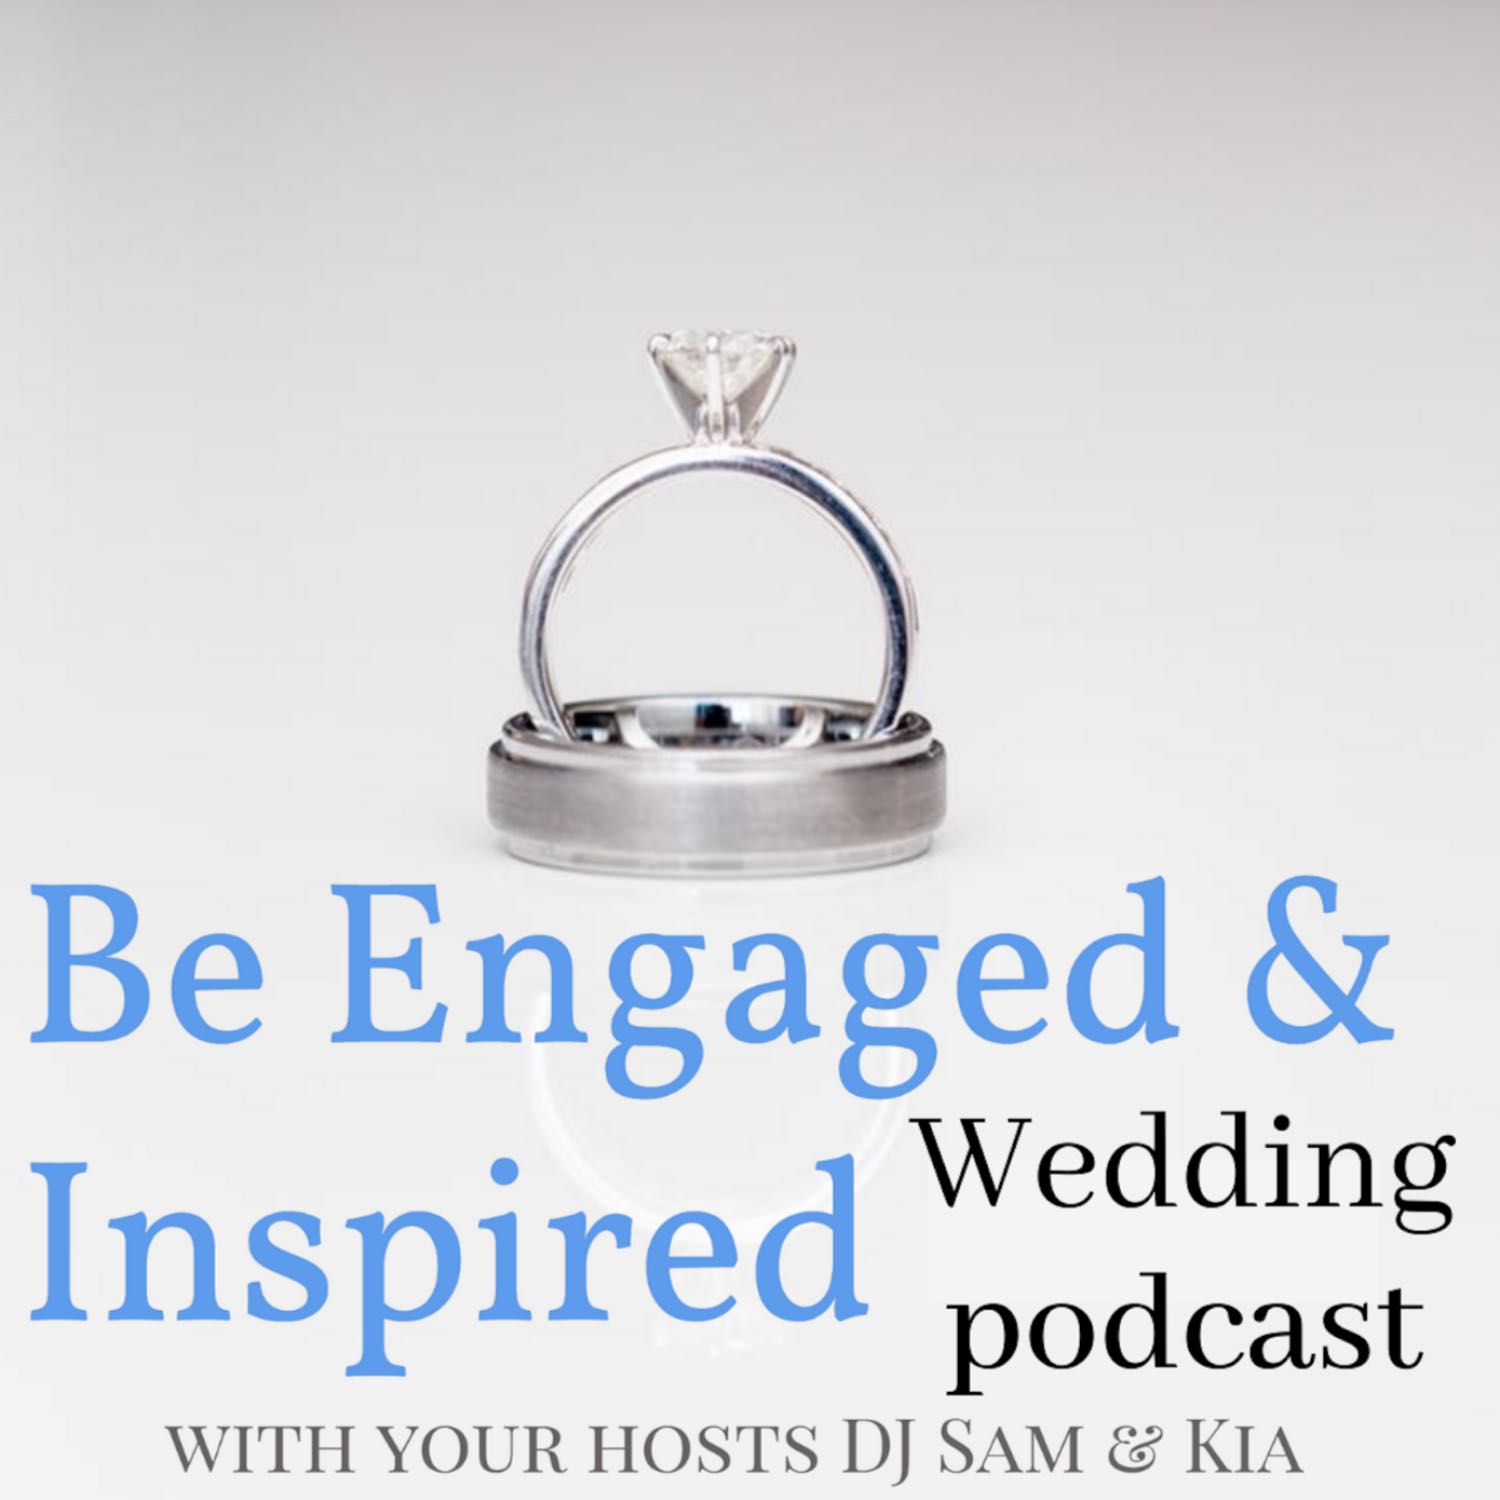 Be Engaged and Inspired Podcast